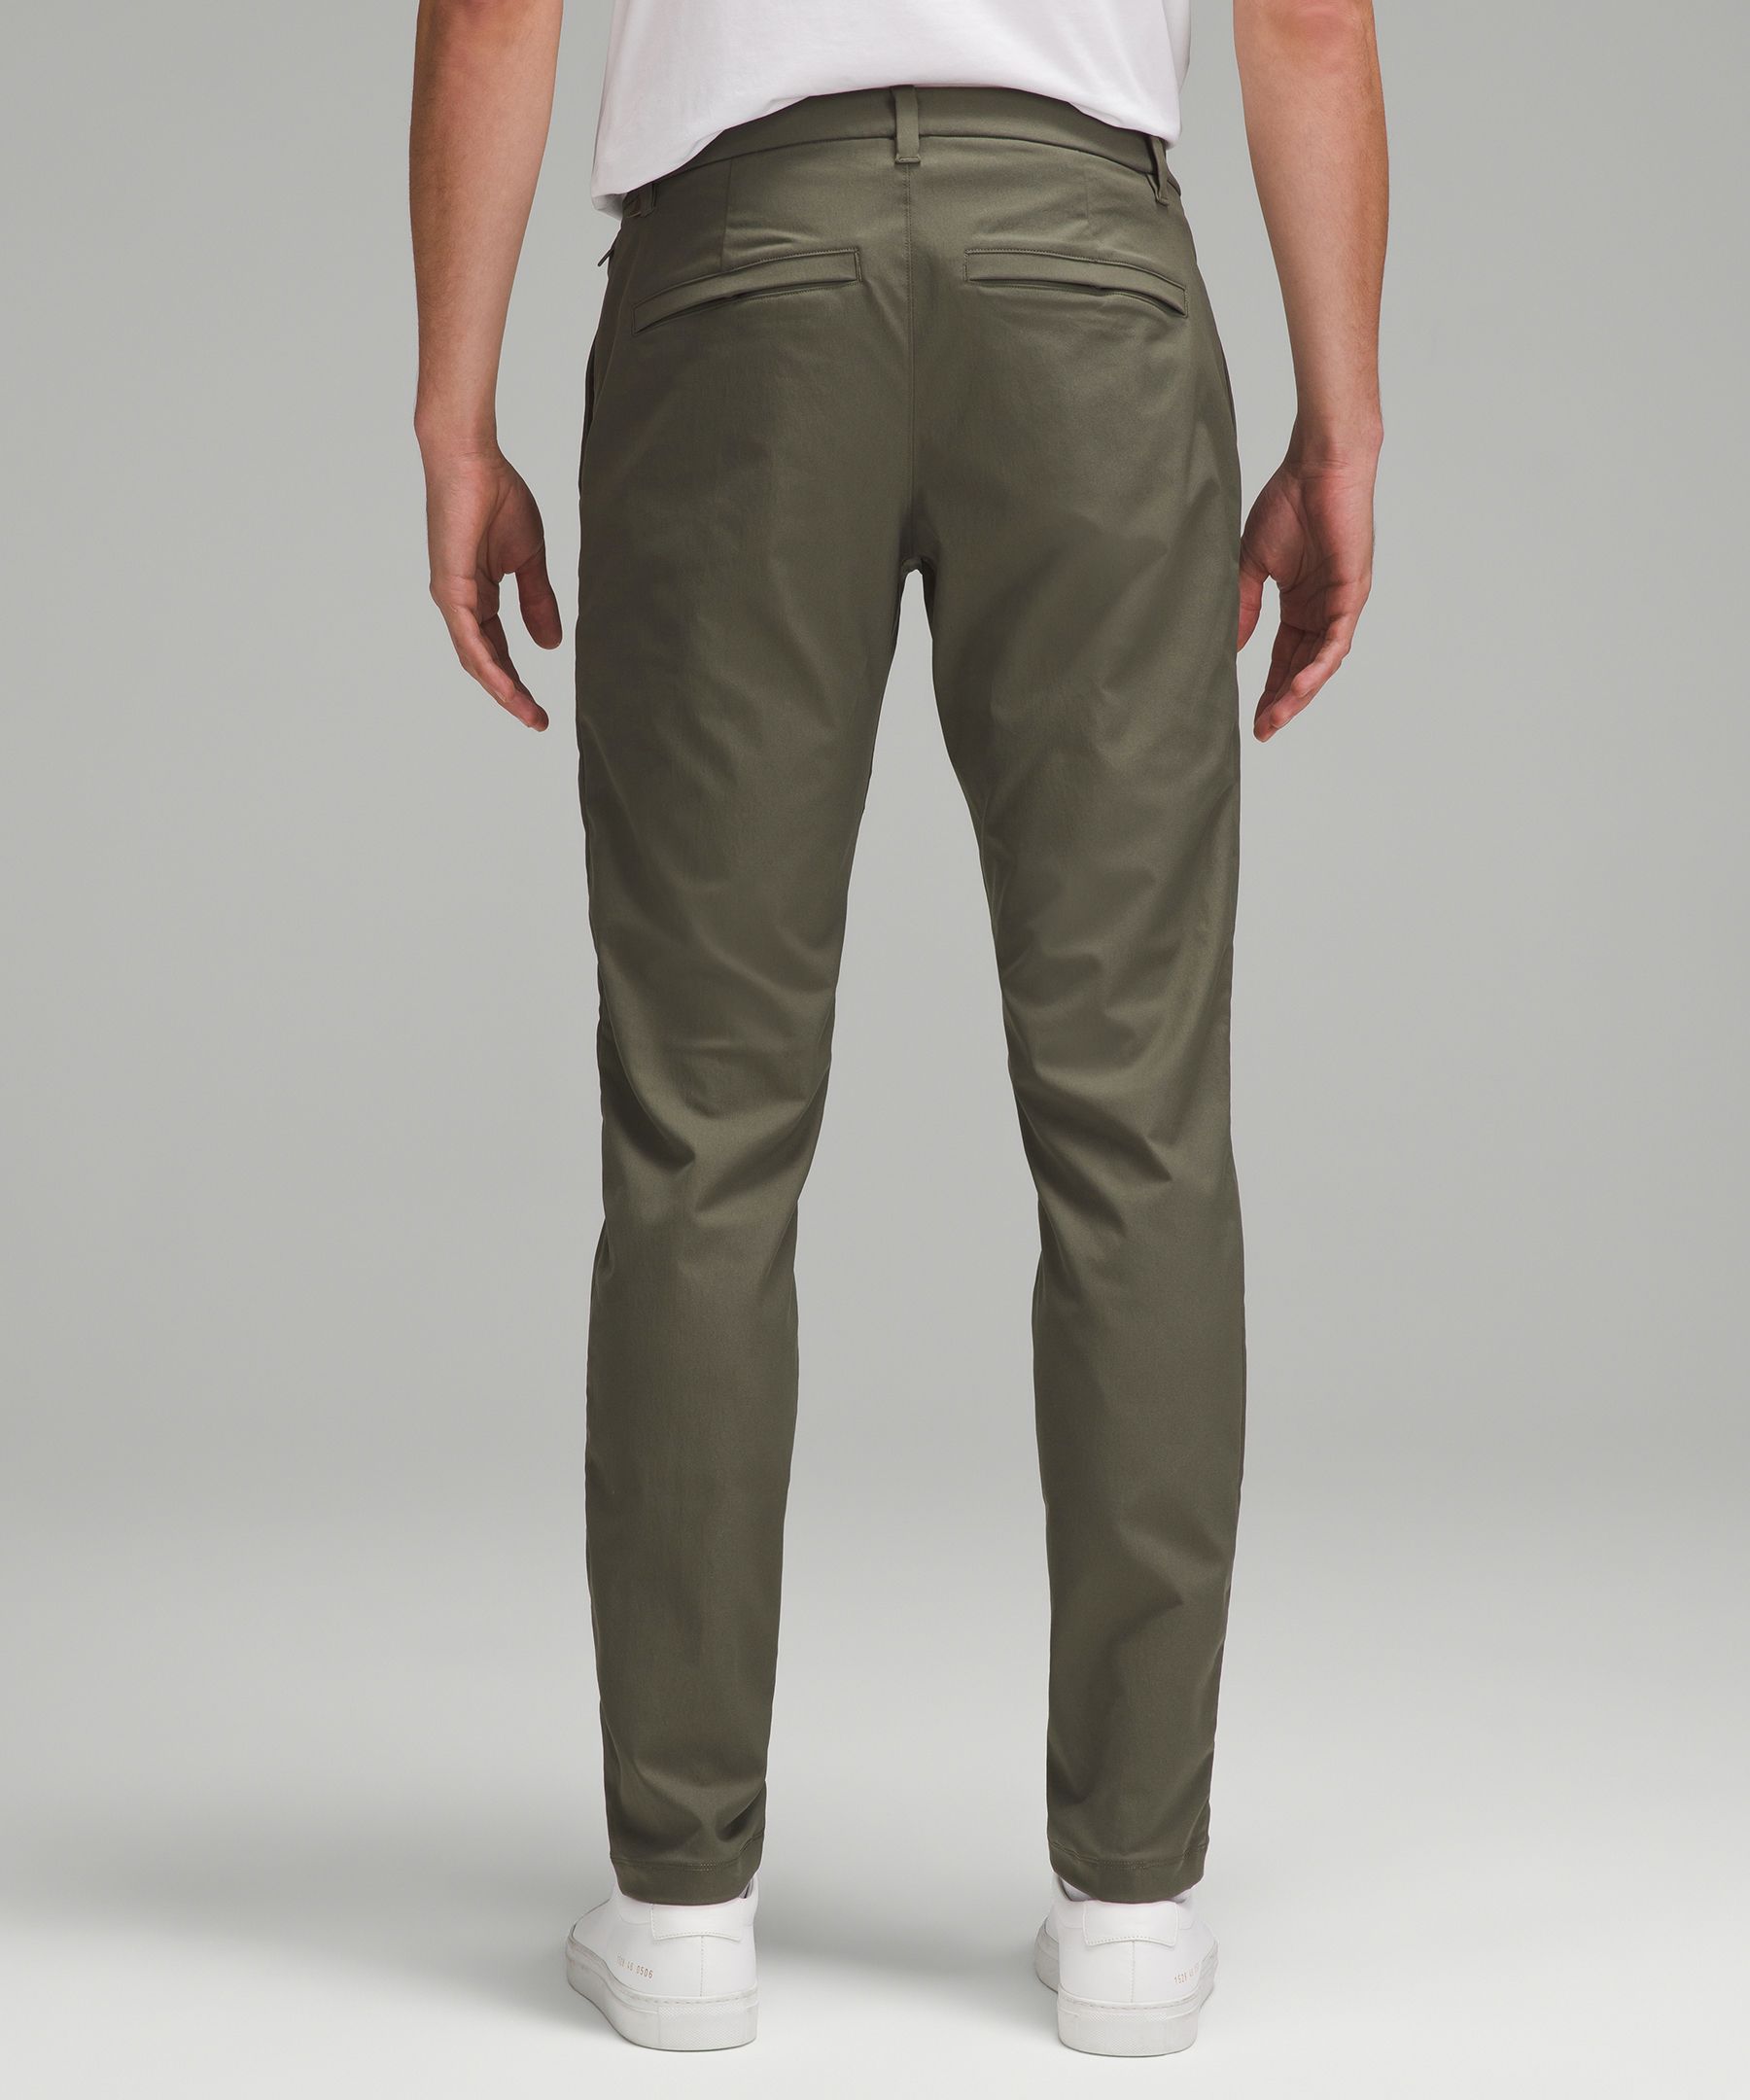 ABC Slim-Fit Trouser 30"L *Smooth Twill | Men's Joggers